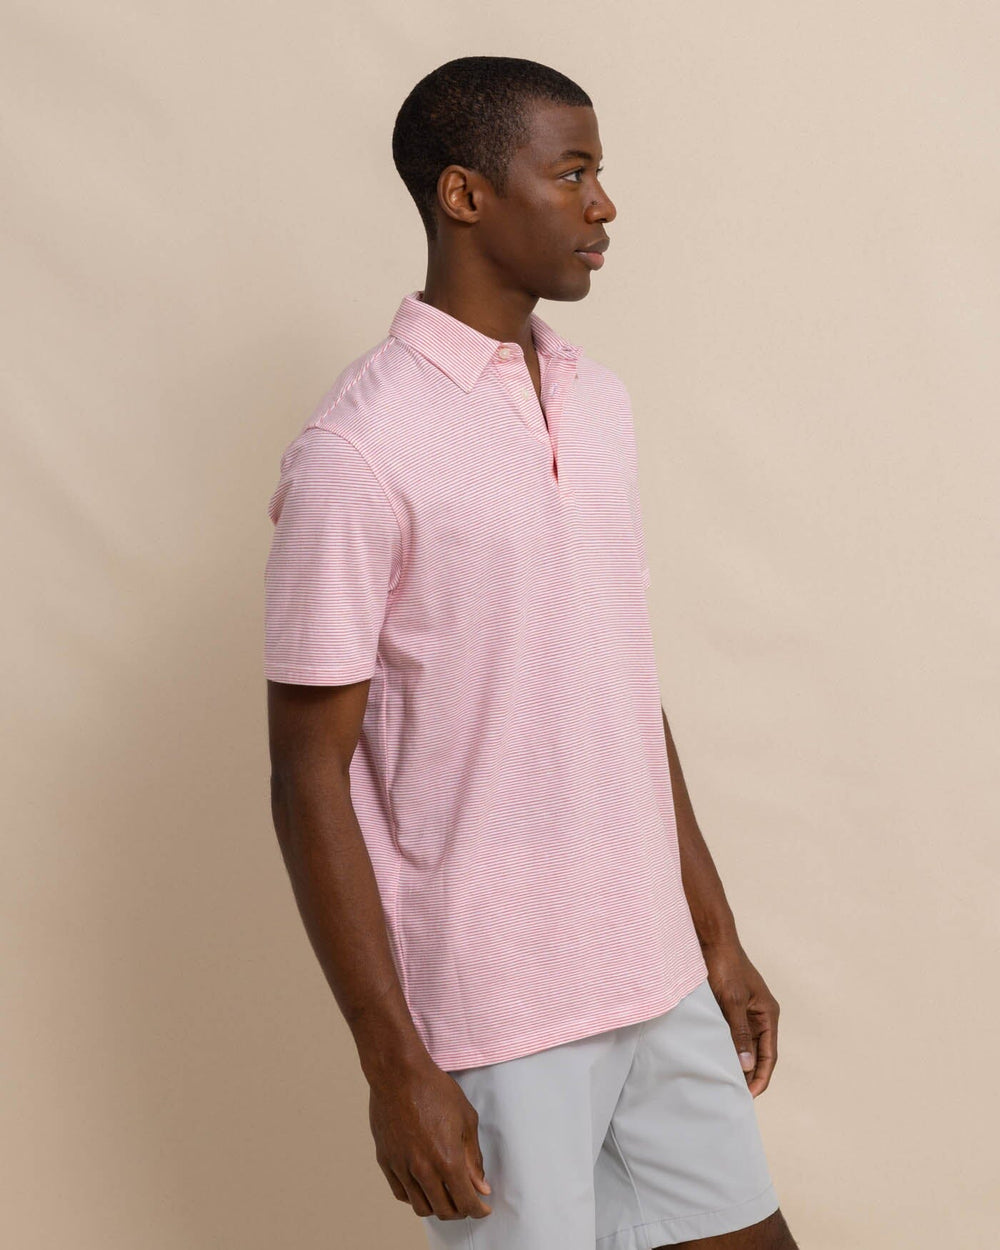 The front view of the Southern Tide The Seaport Davenport Stripe Polo by Southern Tide - Teaberry Pink